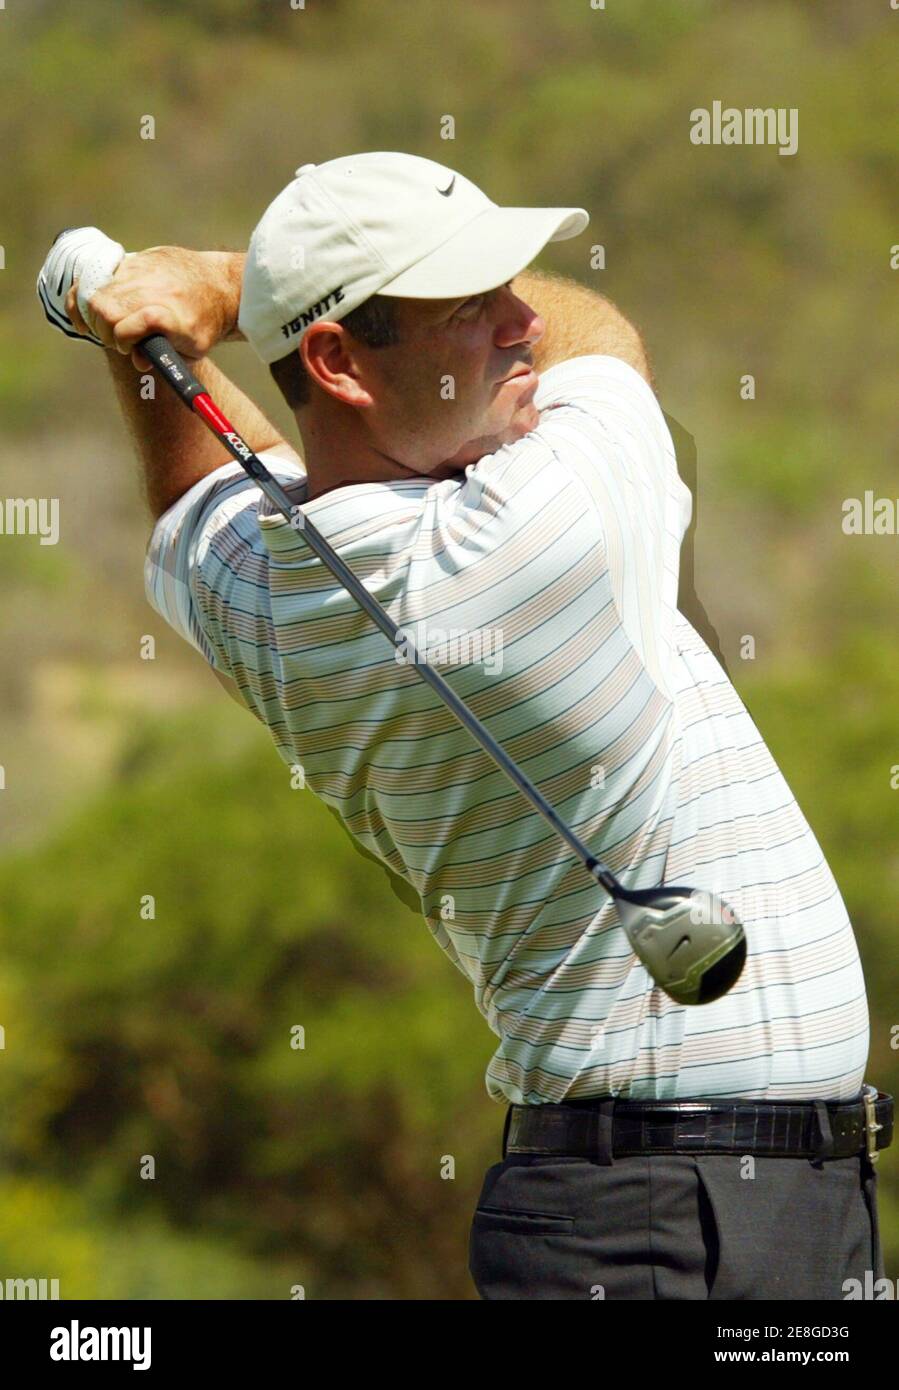 Stewart Cink of the U.S. plays a shot during the first day of the $4 million Sun City Golf Challenge in Sun City, west of Johannesburg, in South Africa December 1, 2005. Cink finished at one over 73. REUTERS/Juda Ngwenya Stock Photo